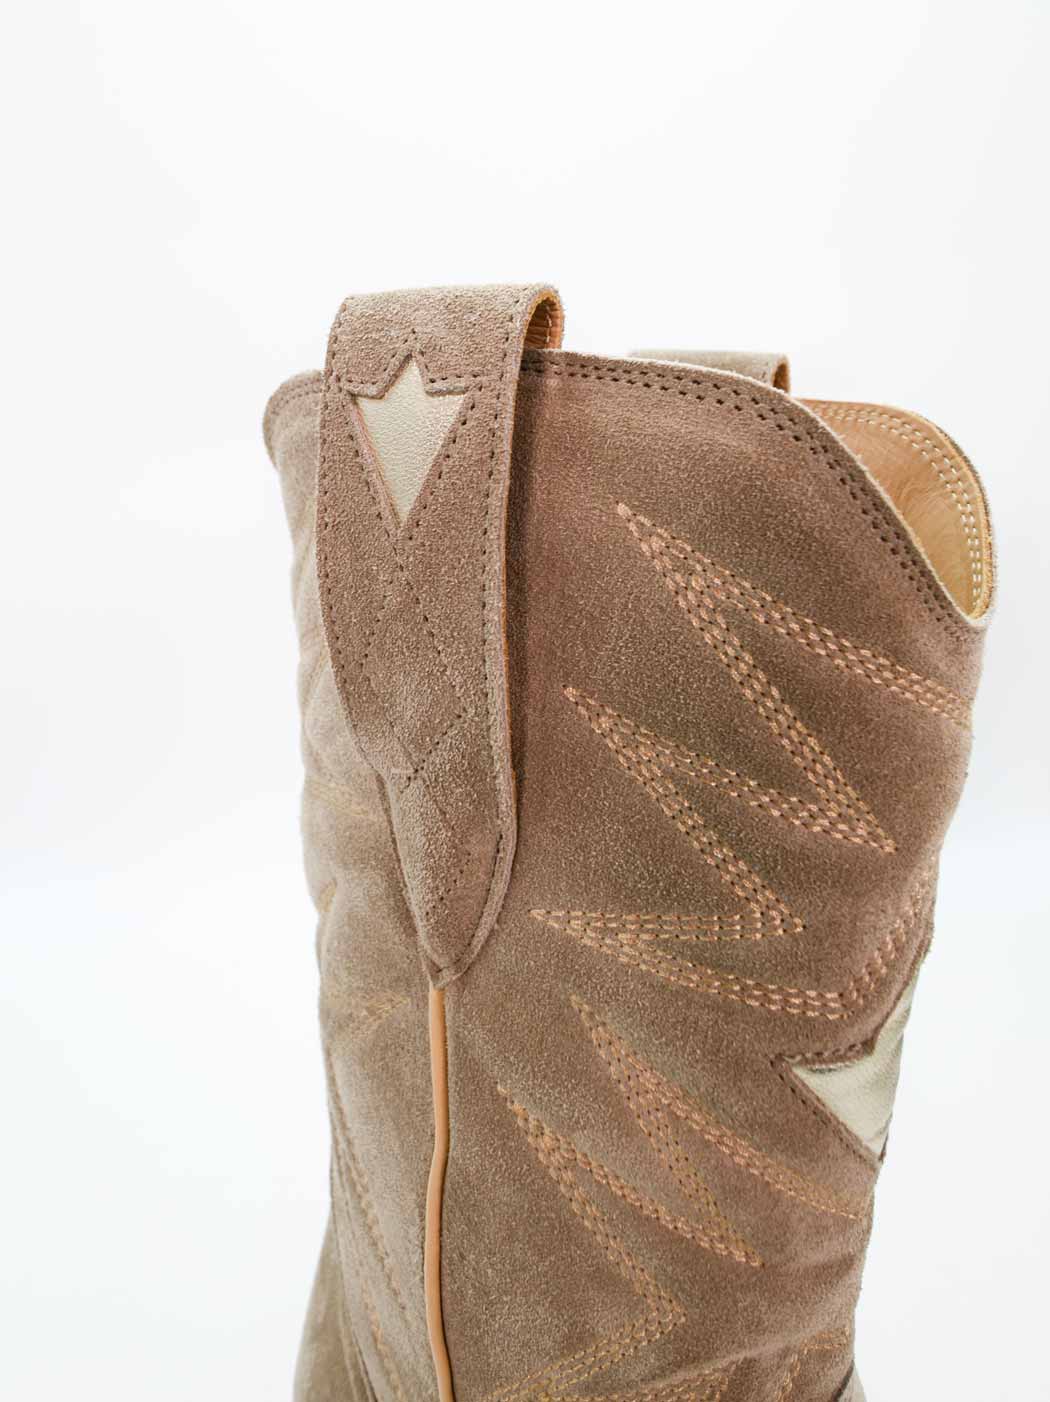 Western Cowboy Boots in Brown Crust Leather